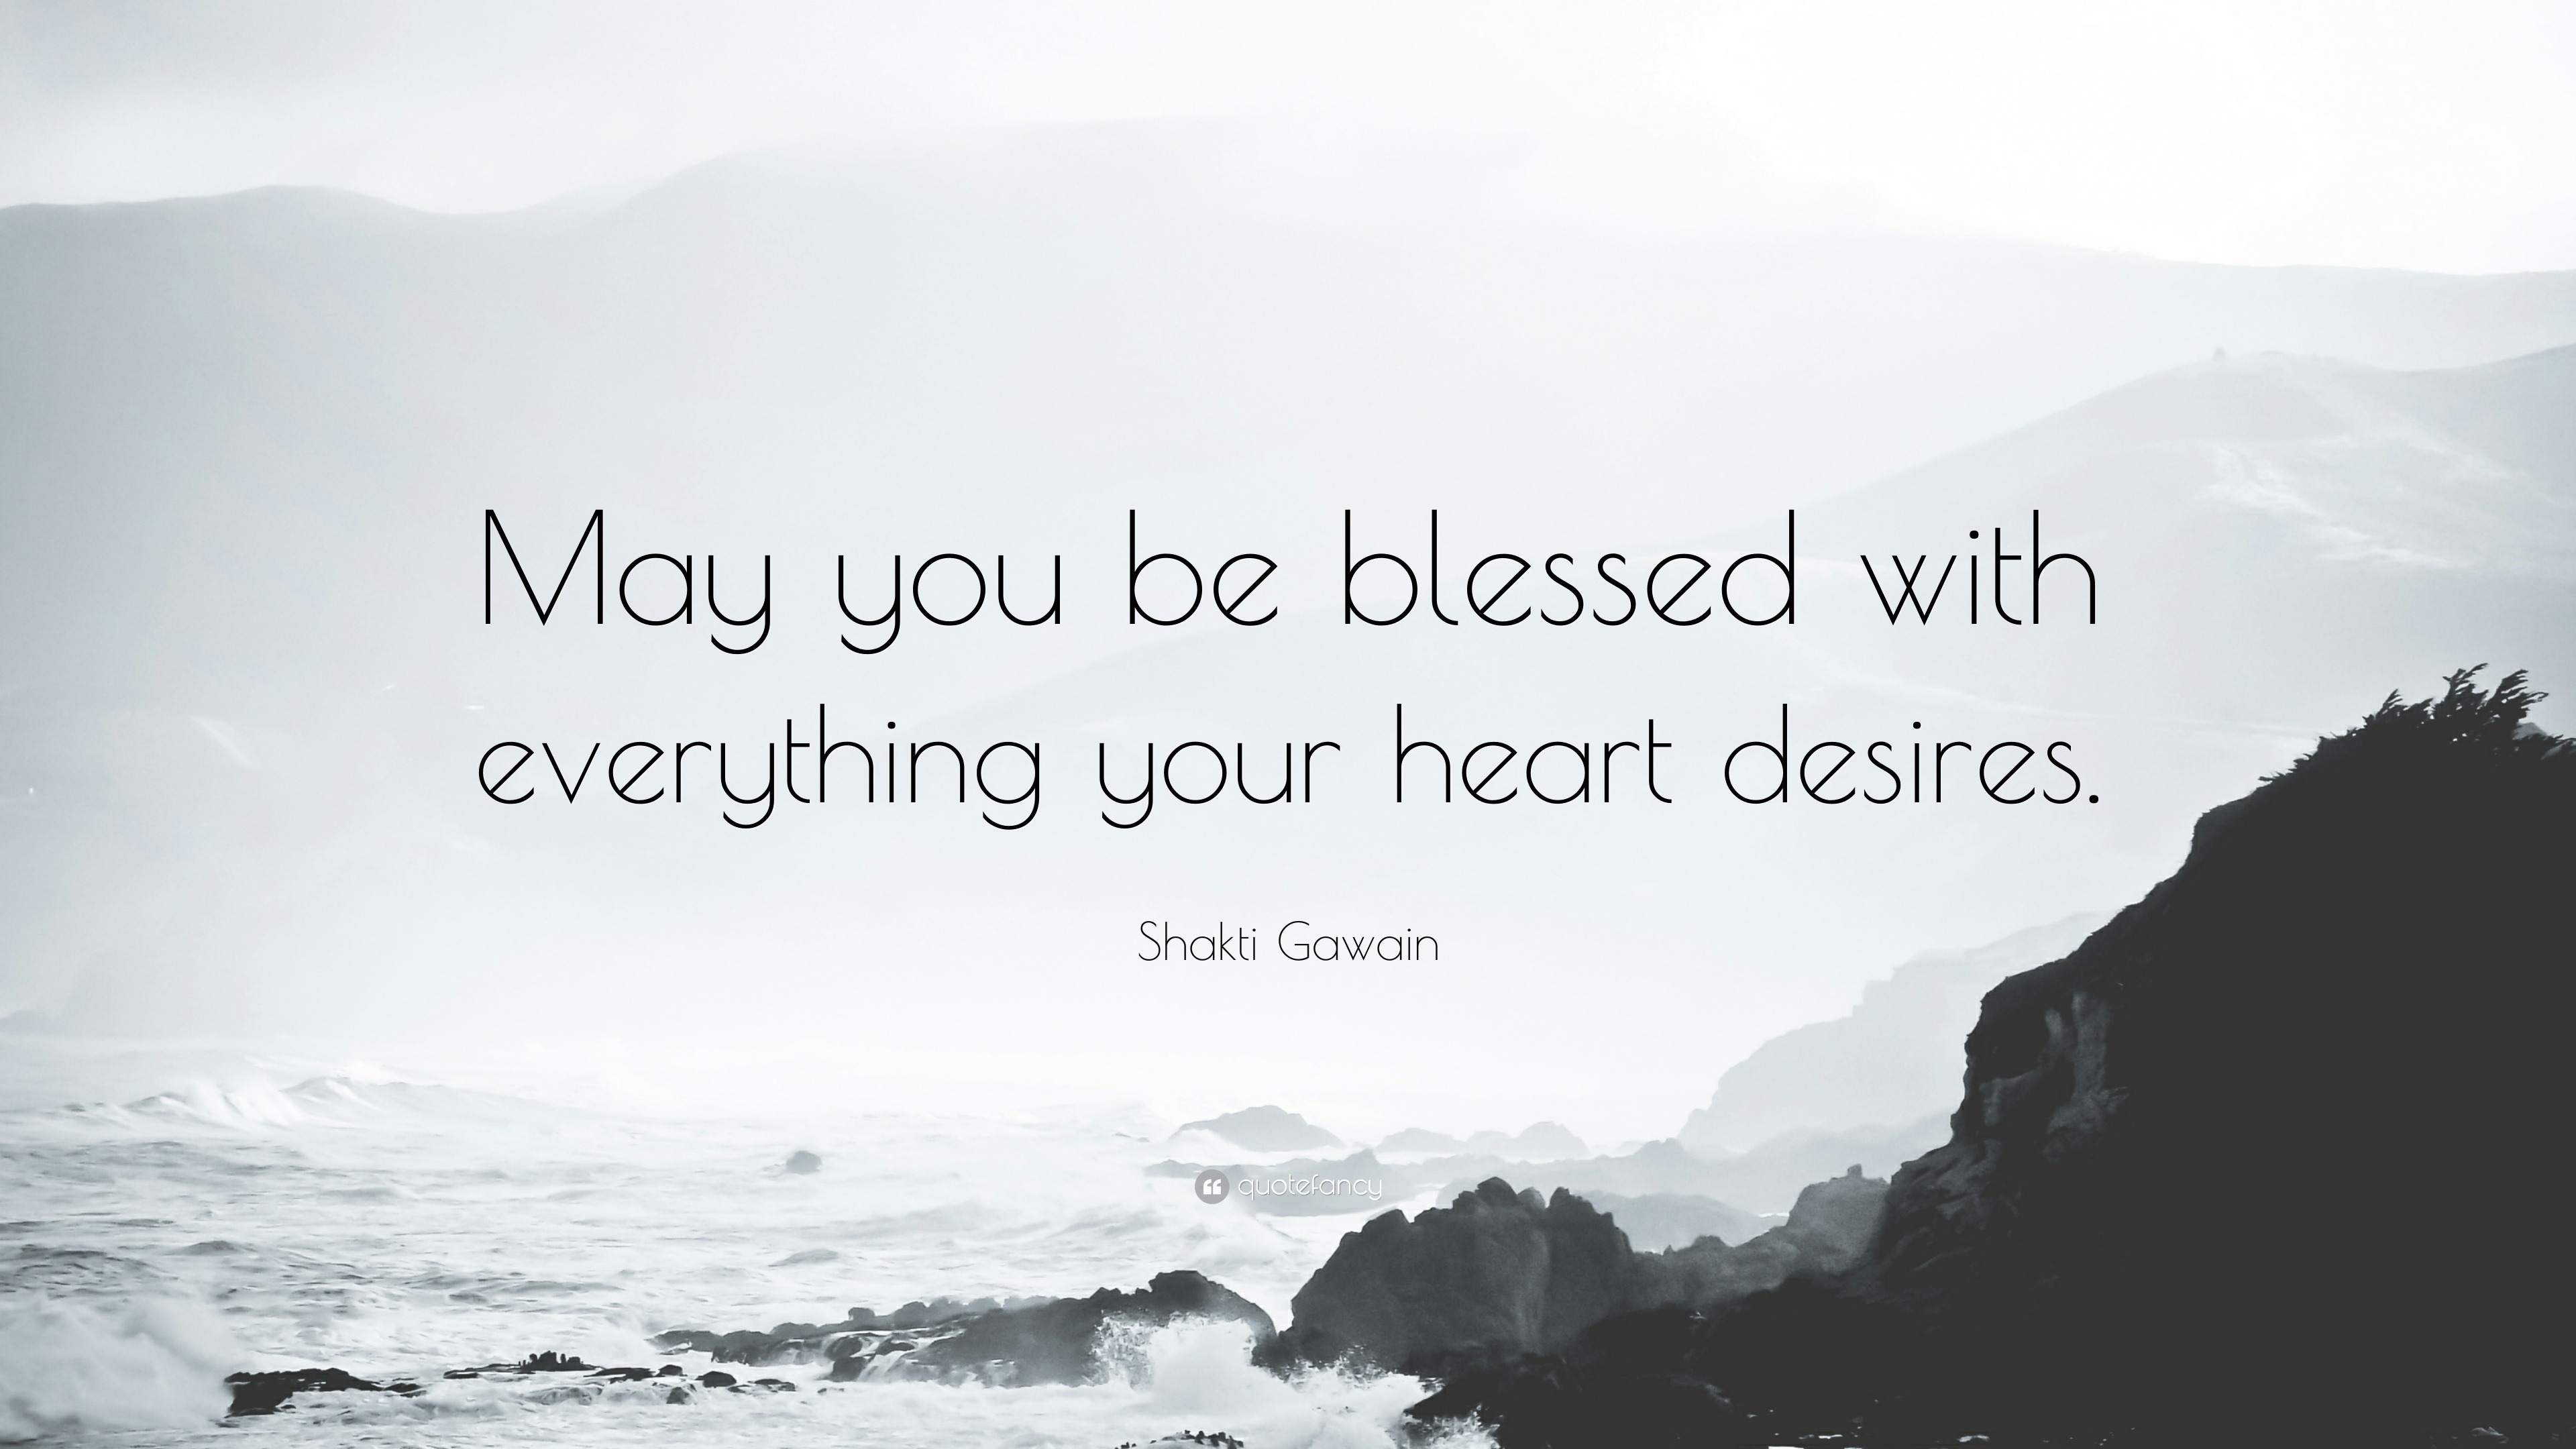 Shakti Gawain Quote May You Be Blessed With Everything Your Heart Desires